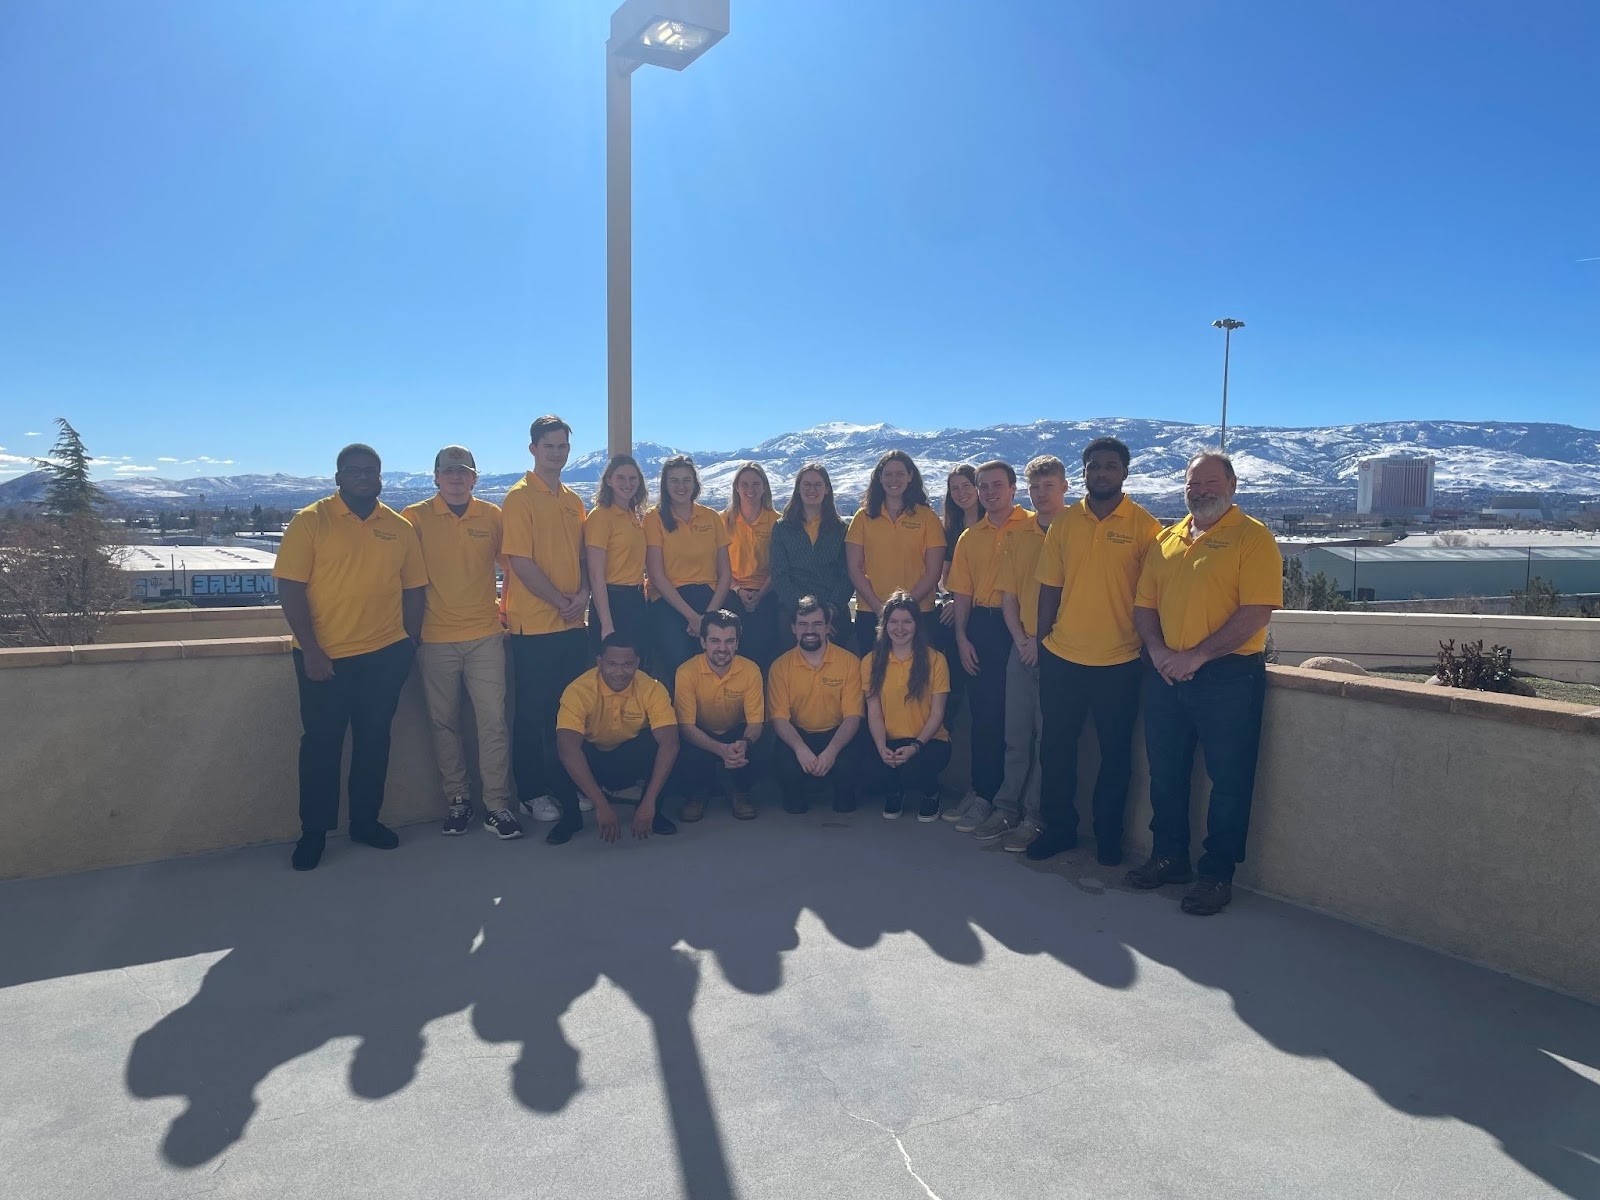 A professor and 16 students wearing yellow polo shirts pose outdoors on the roof of a building with a mountainous background.